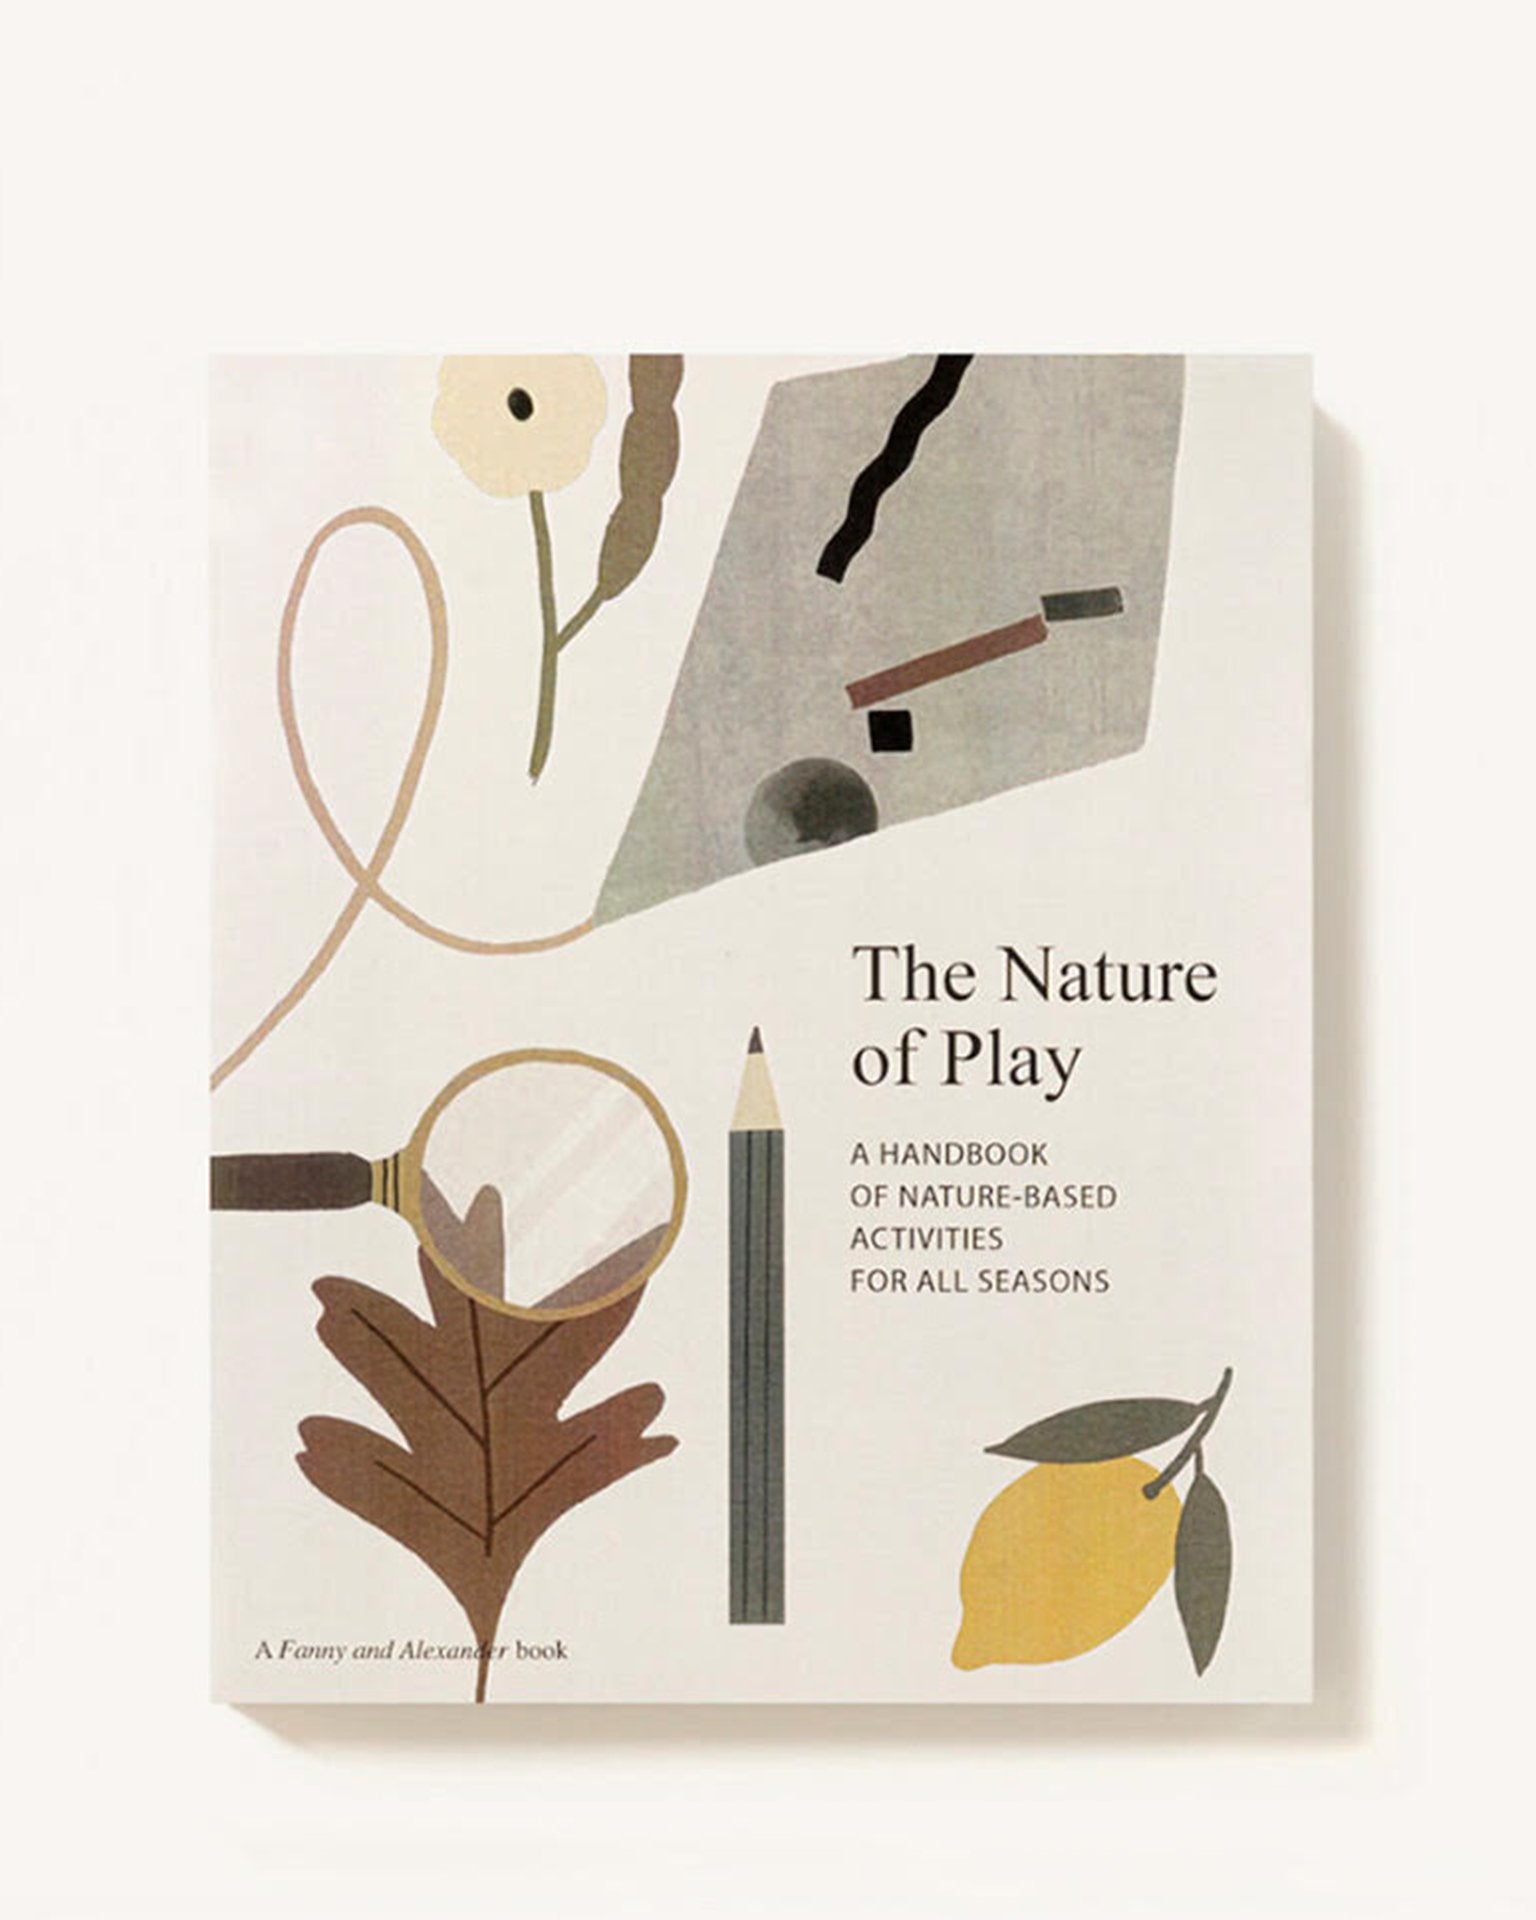 Little fanny + alexander Books the nature of play: a handbook of nature-based activities for all seasons